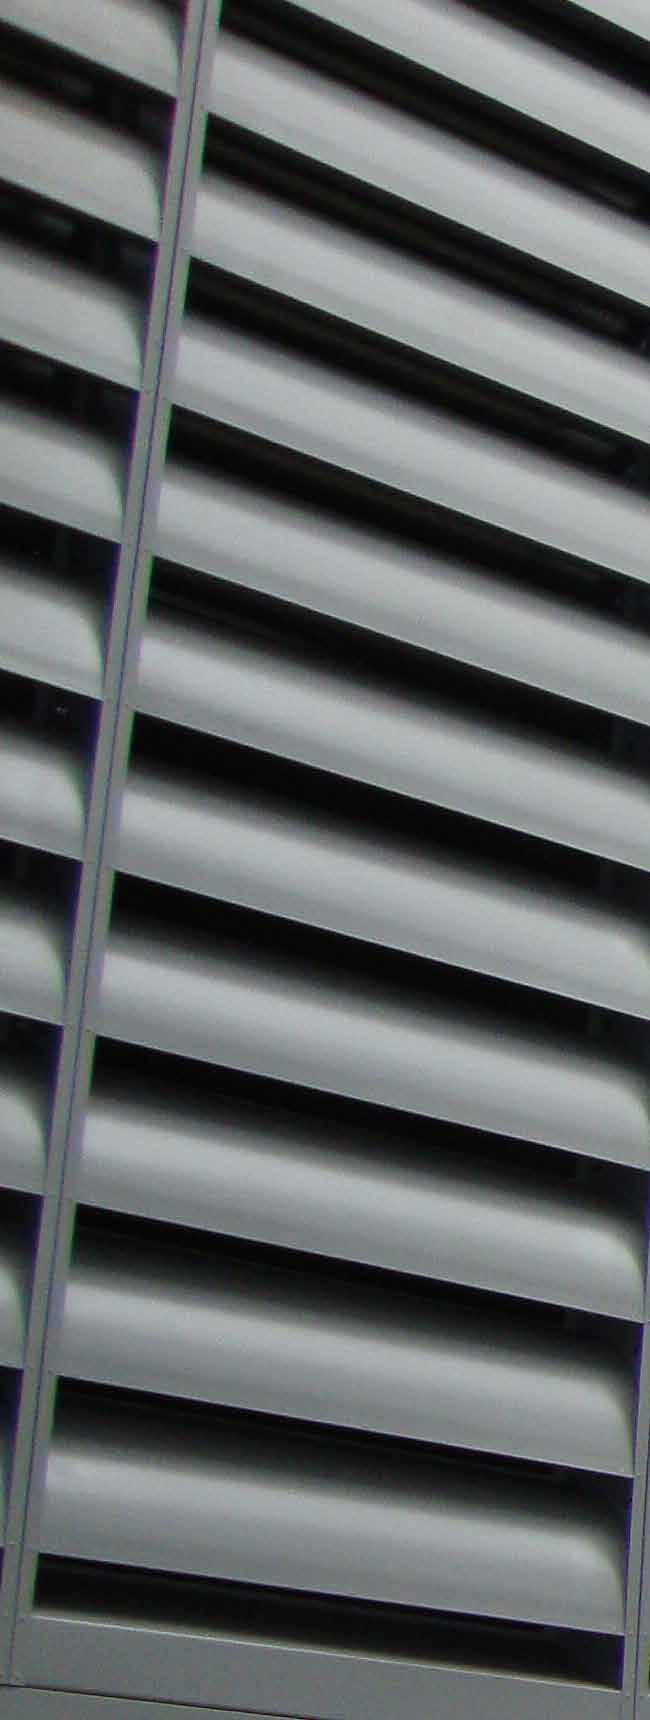 Acoustic Louvres Overview IAC Acoustics is a leading global manufacturer of rugged, high performance acoustic louvres and has completed thousands of installations worldwide.